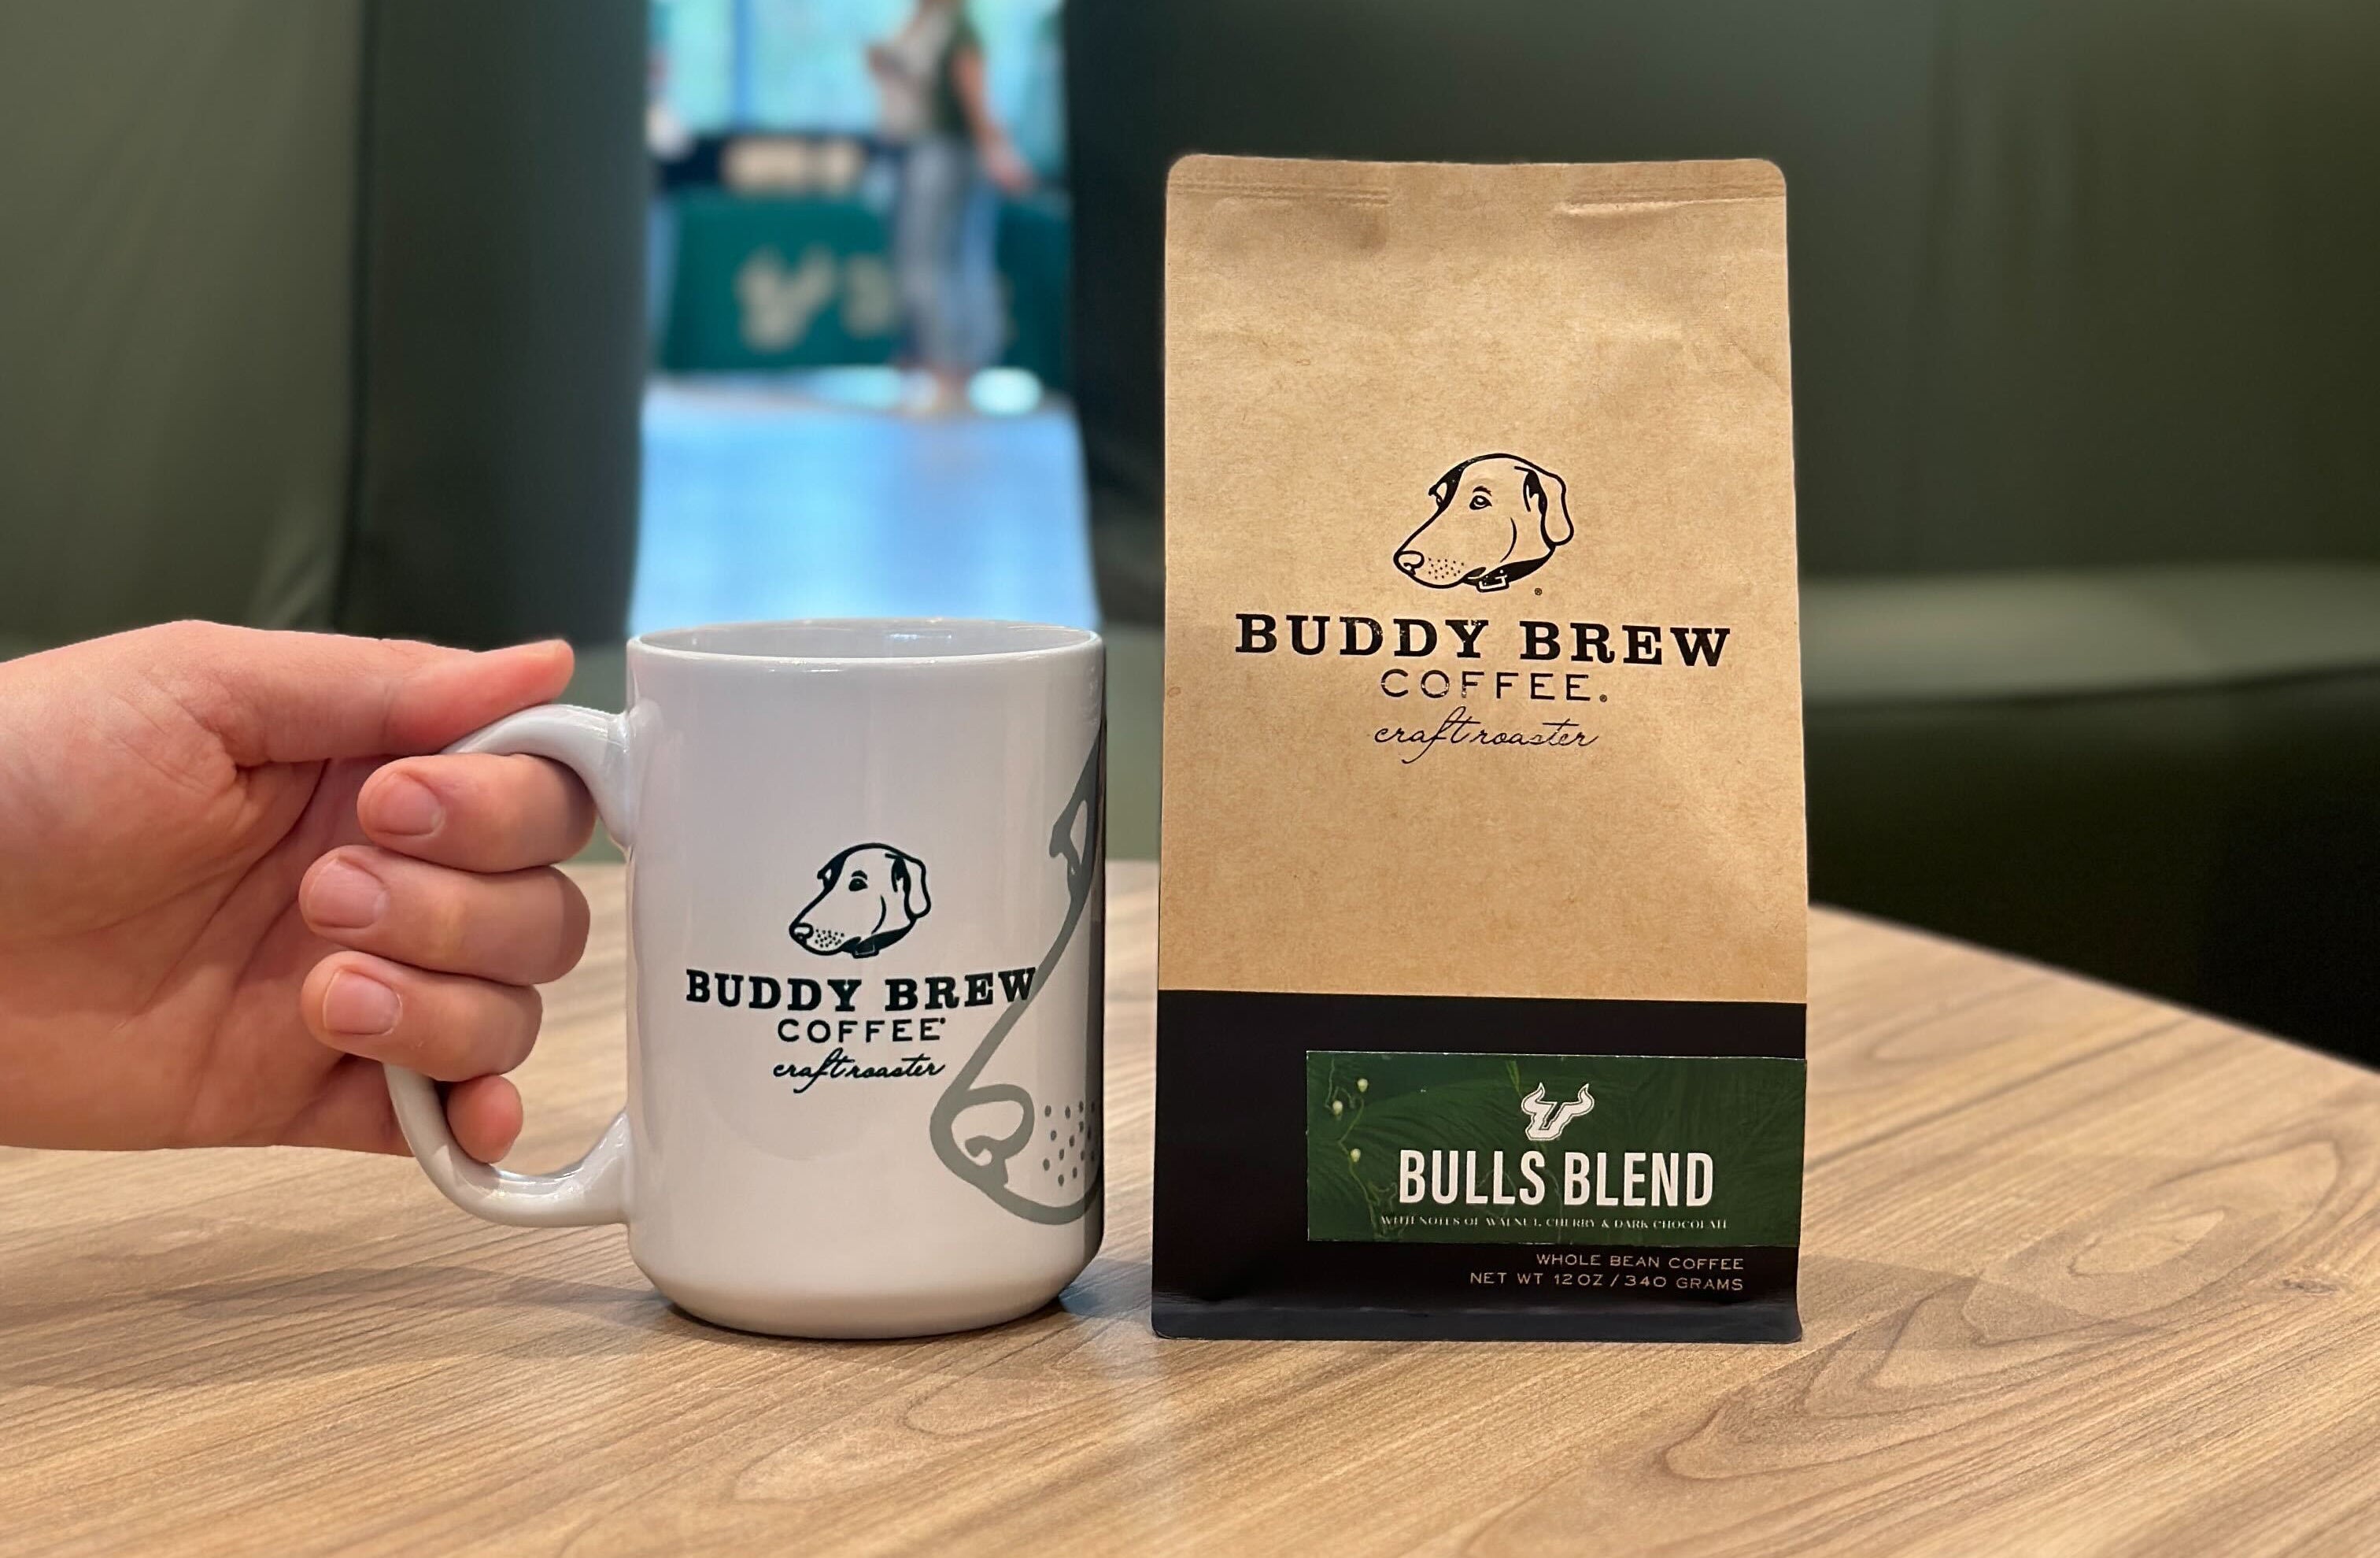 Buddy Brew 'Bulls Blend' coffee launches at USF